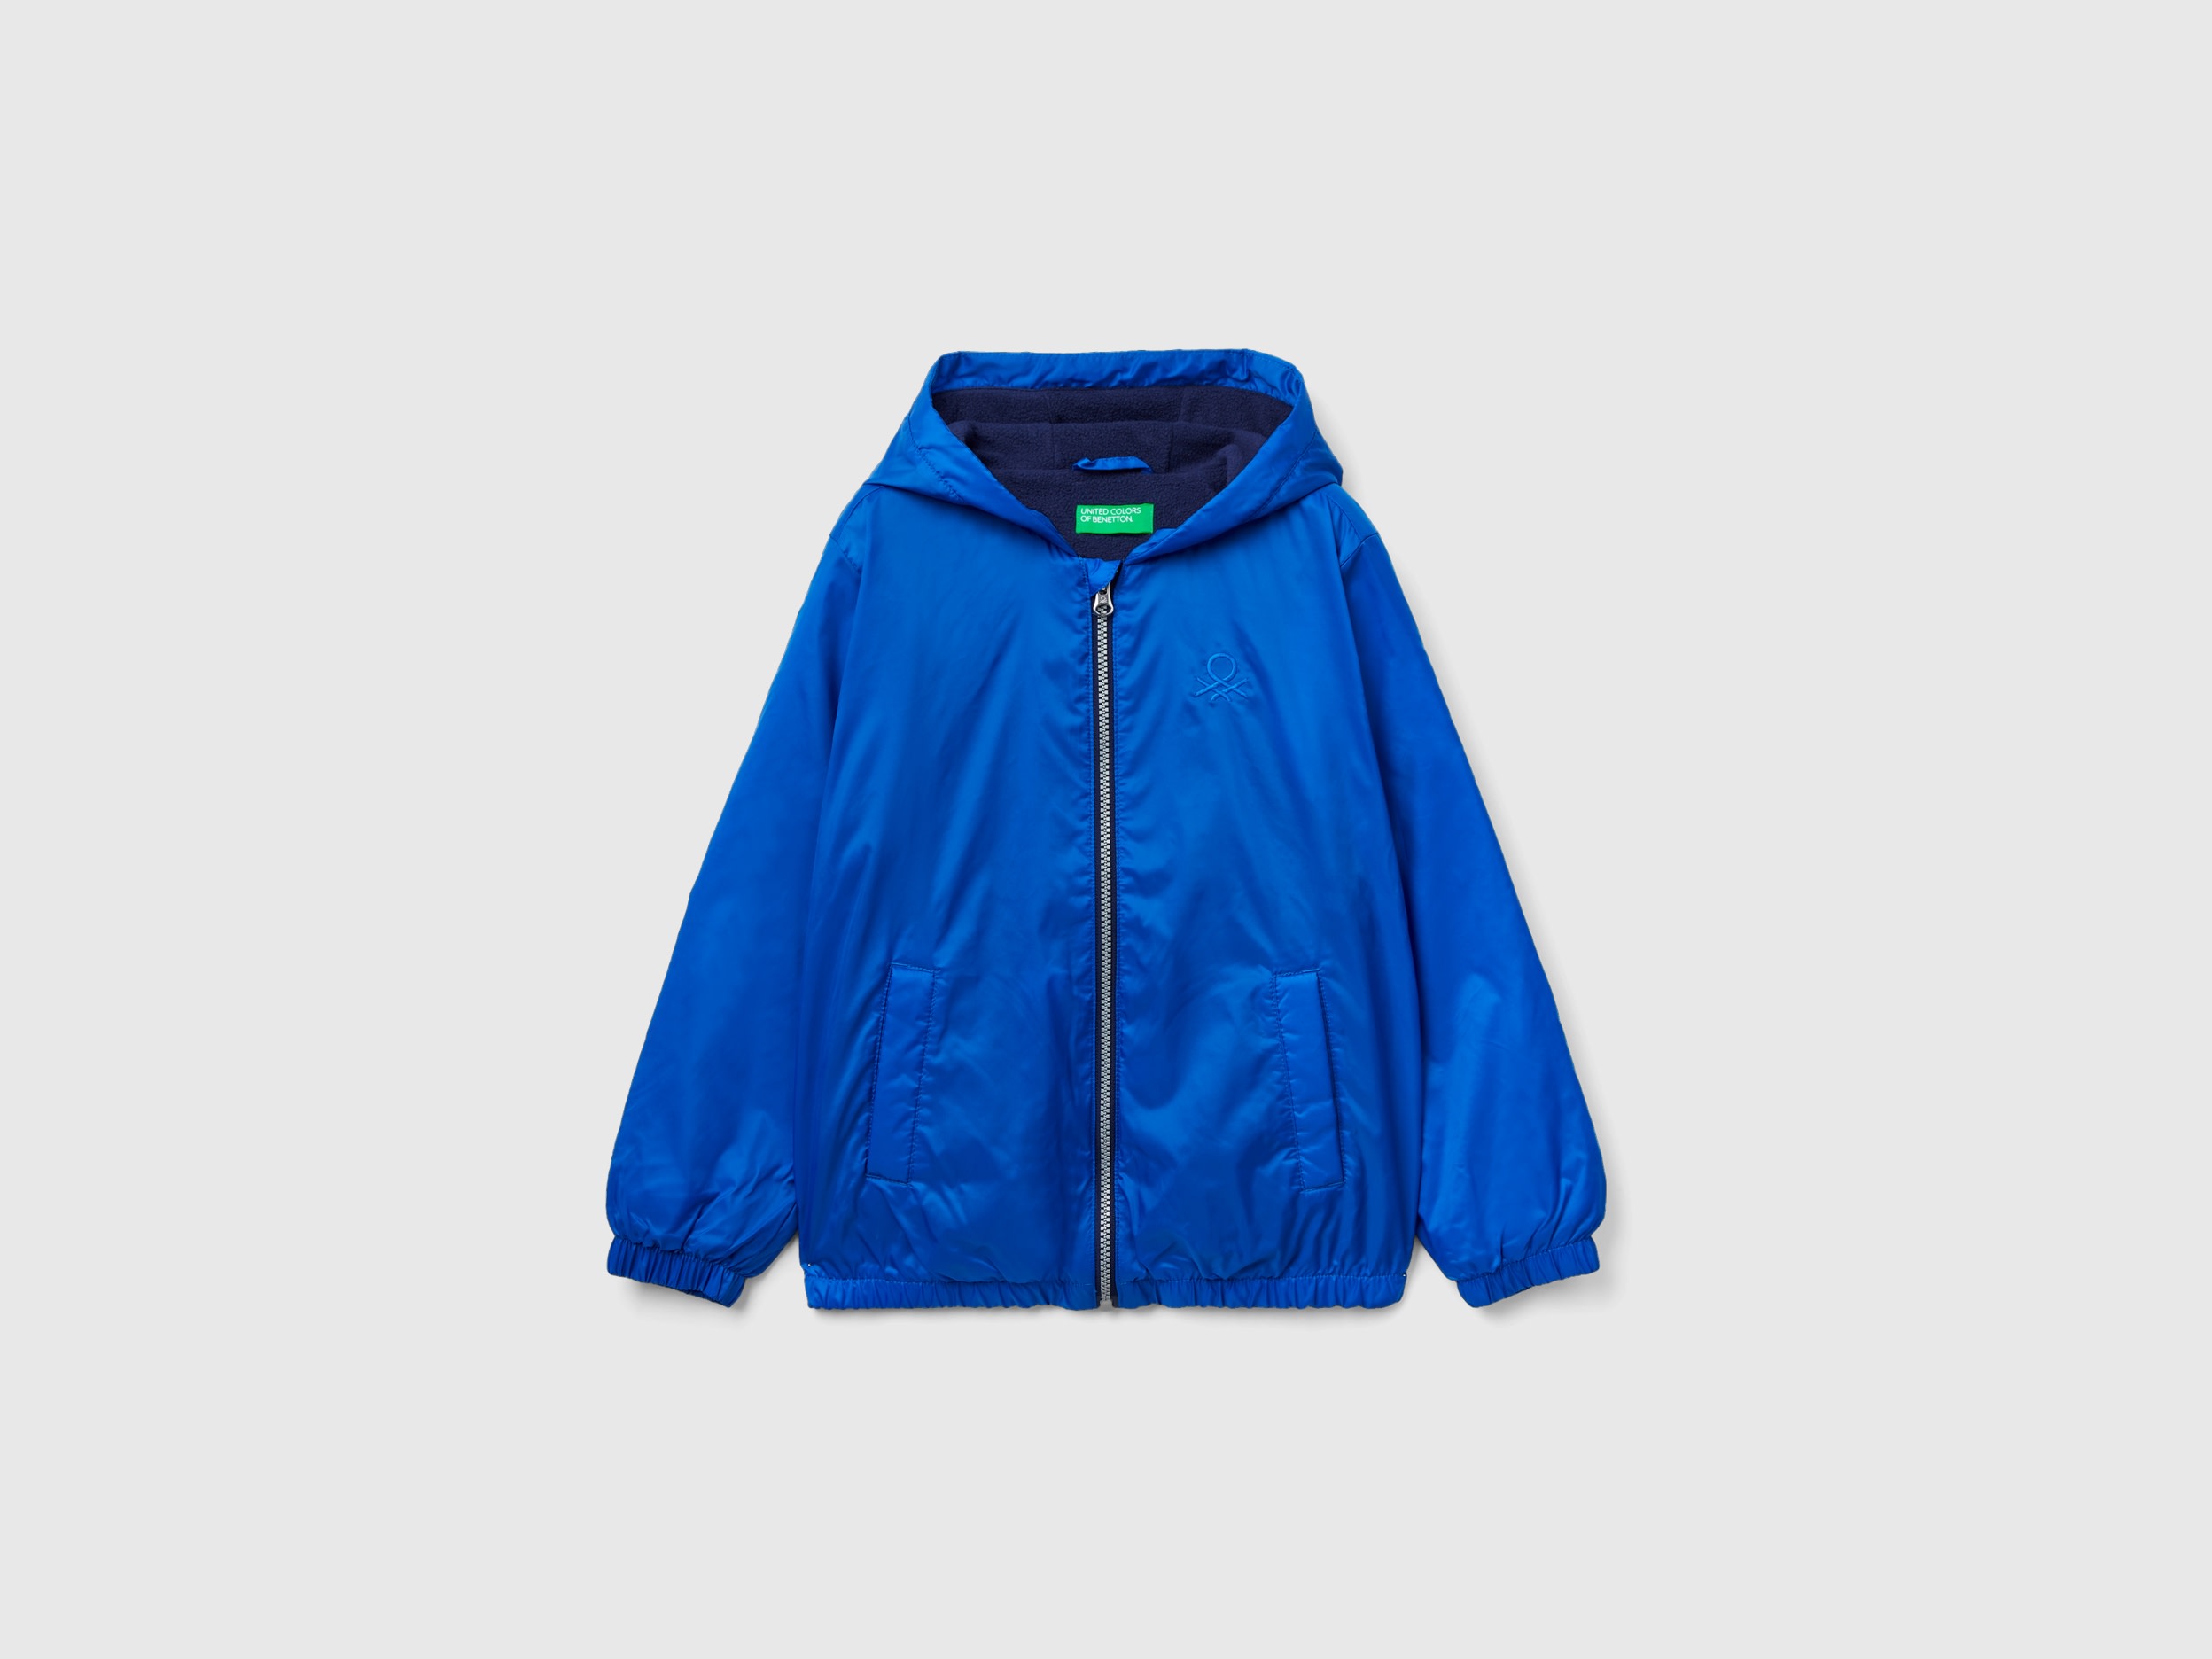 Benetton, Nylon Jacket With Zip And Hood, size 2XL, Bright Blue, Kids